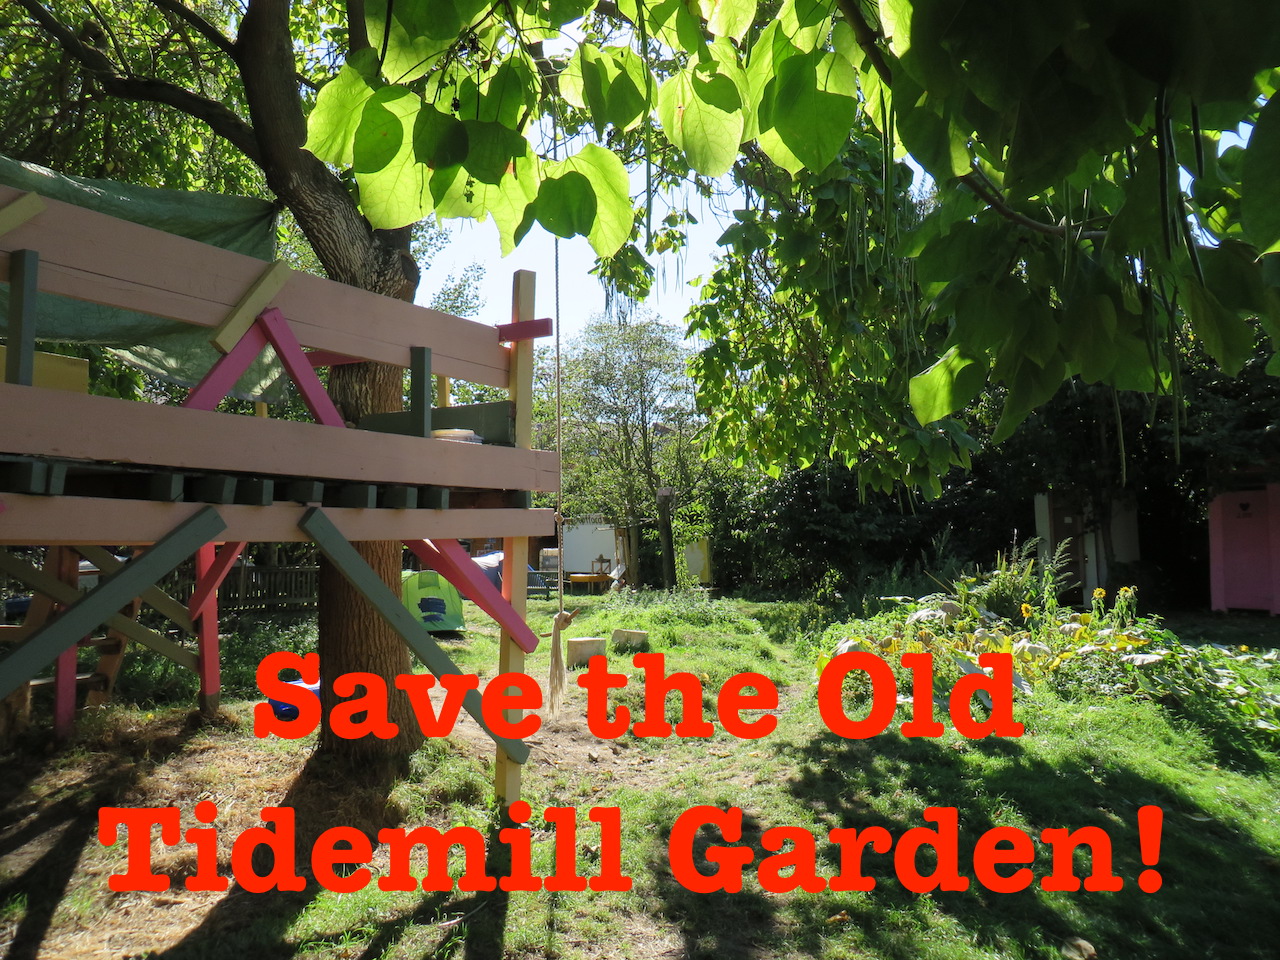 A photo of the Old Tidemill Wildlife Garden, which campaigners have occupied to prevent its destruction by Lewisham Council and Peabody, photographed on September 16, 2018 (Photo: Andy Worthington).